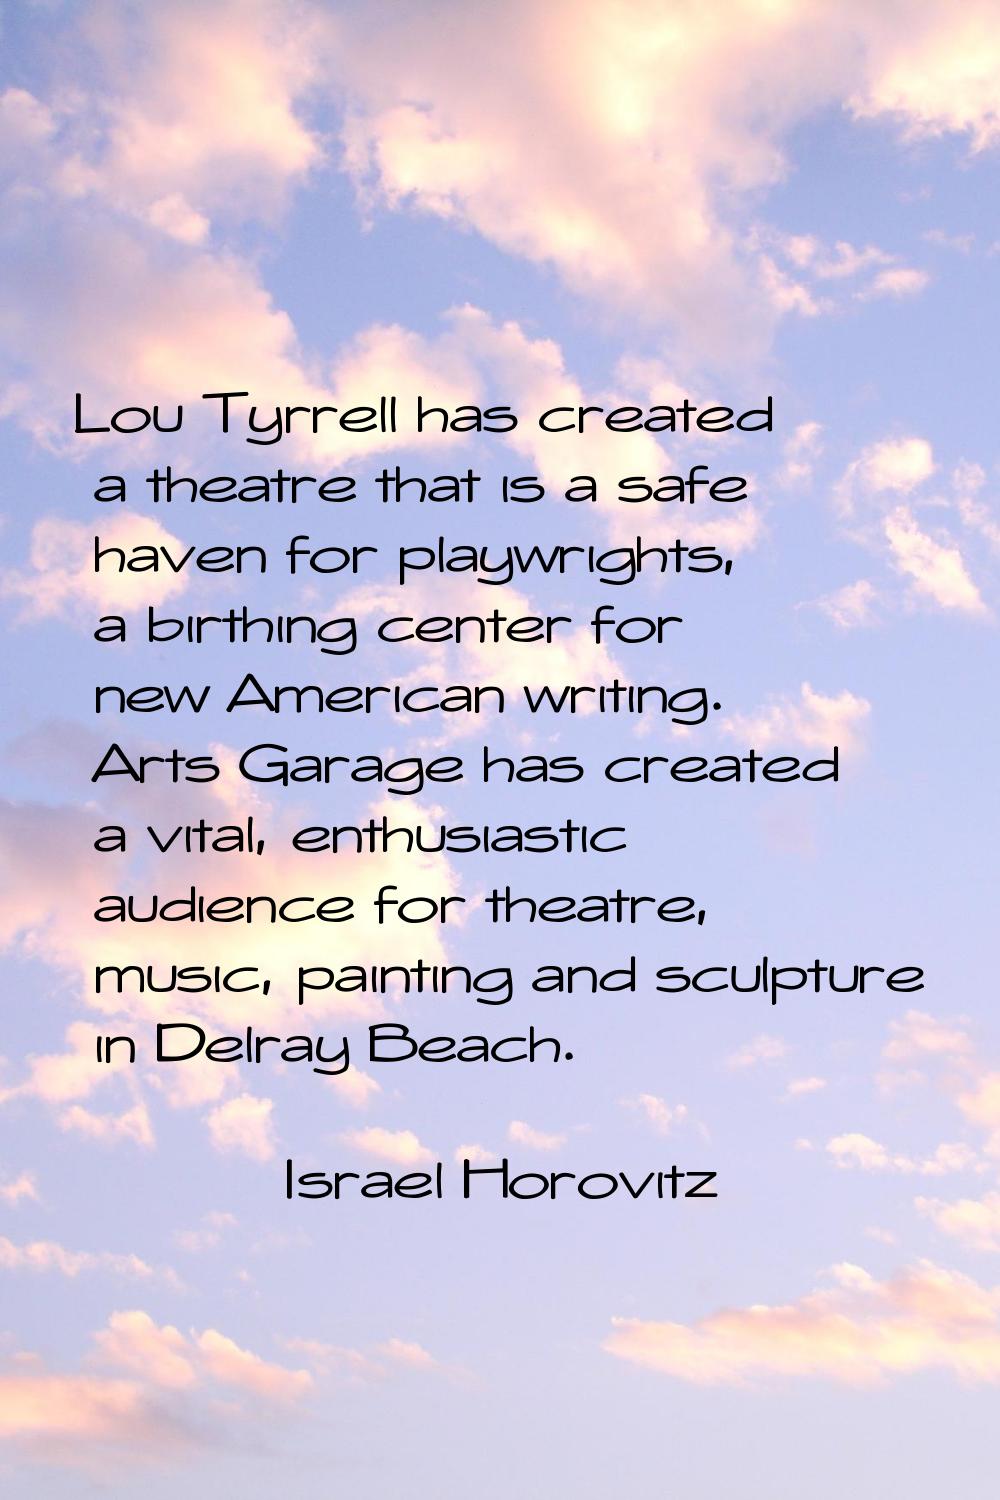 Lou Tyrrell has created a theatre that is a safe haven for playwrights, a birthing center for new A